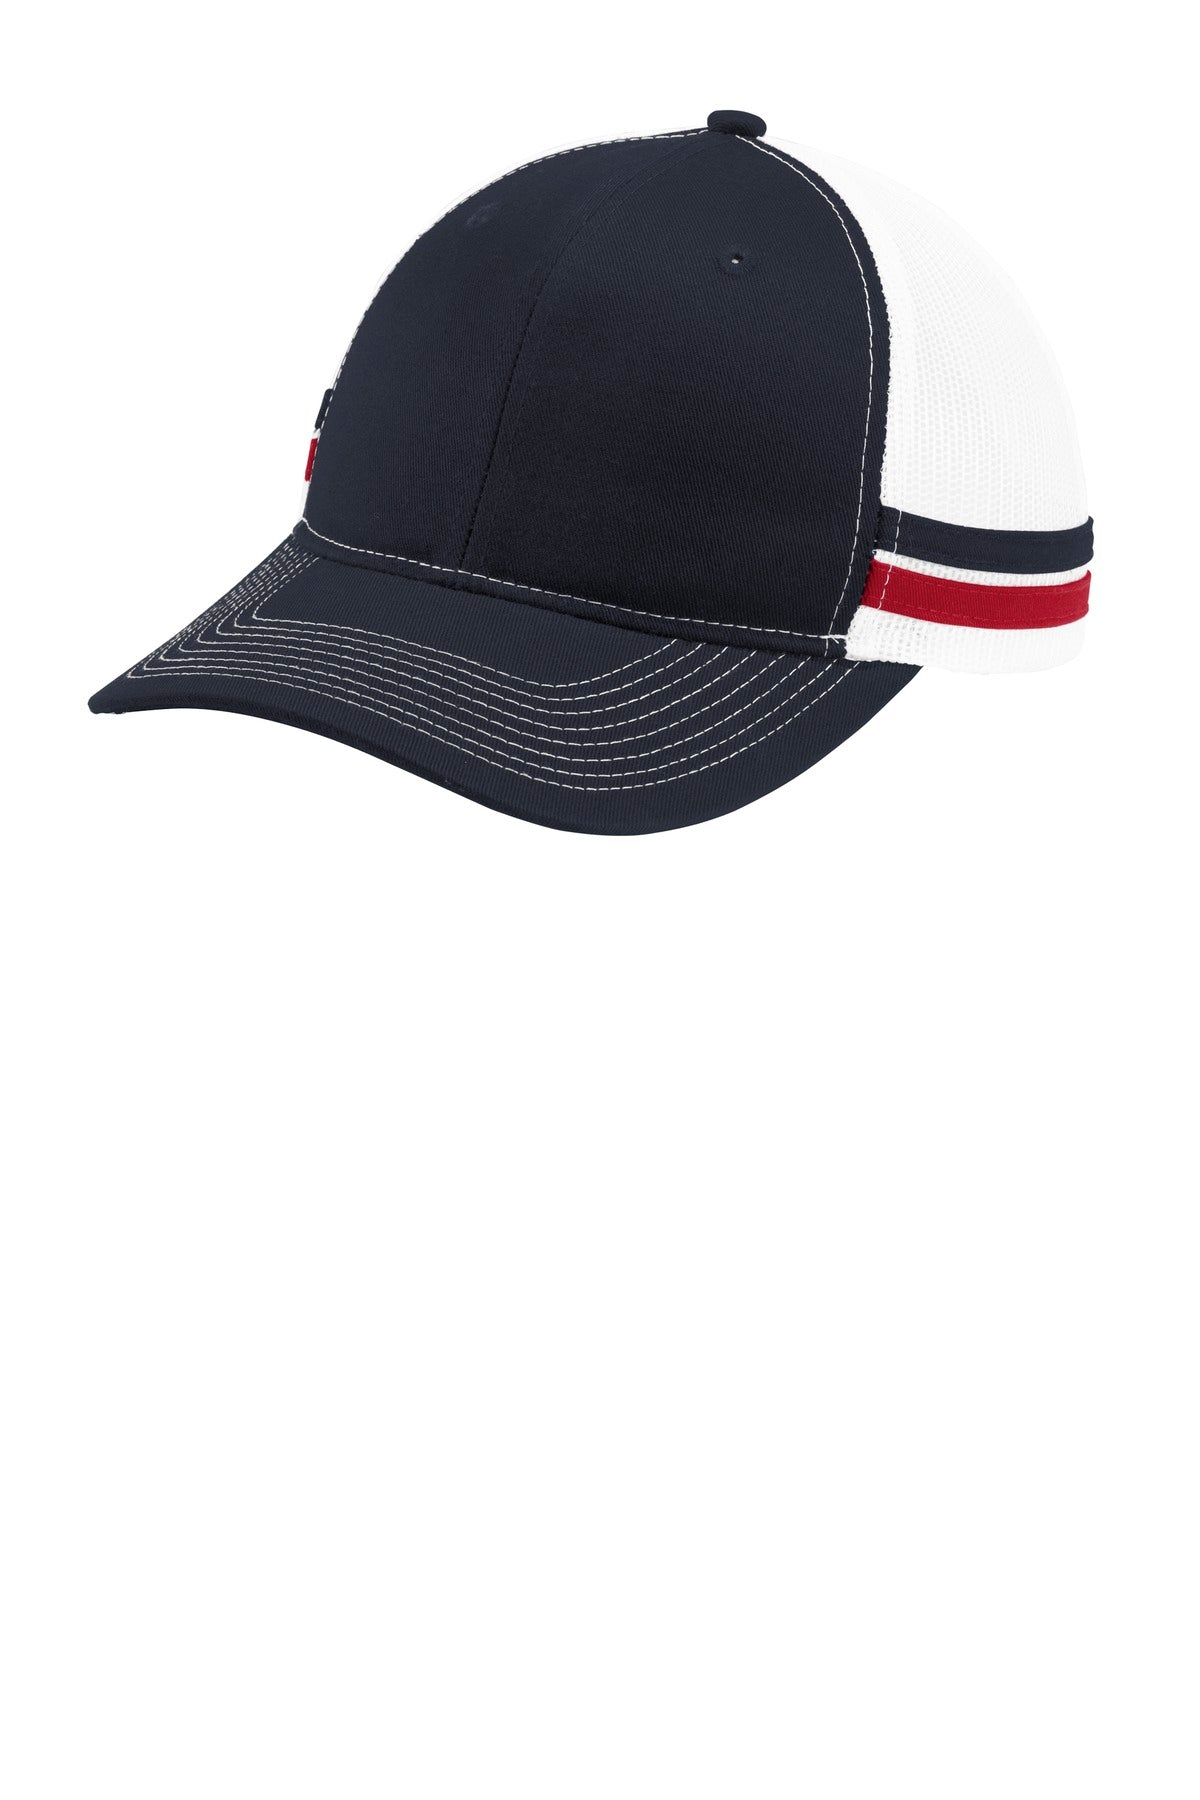 Caps Rich Navy/ Flame Red/ White OSFA Port Authority